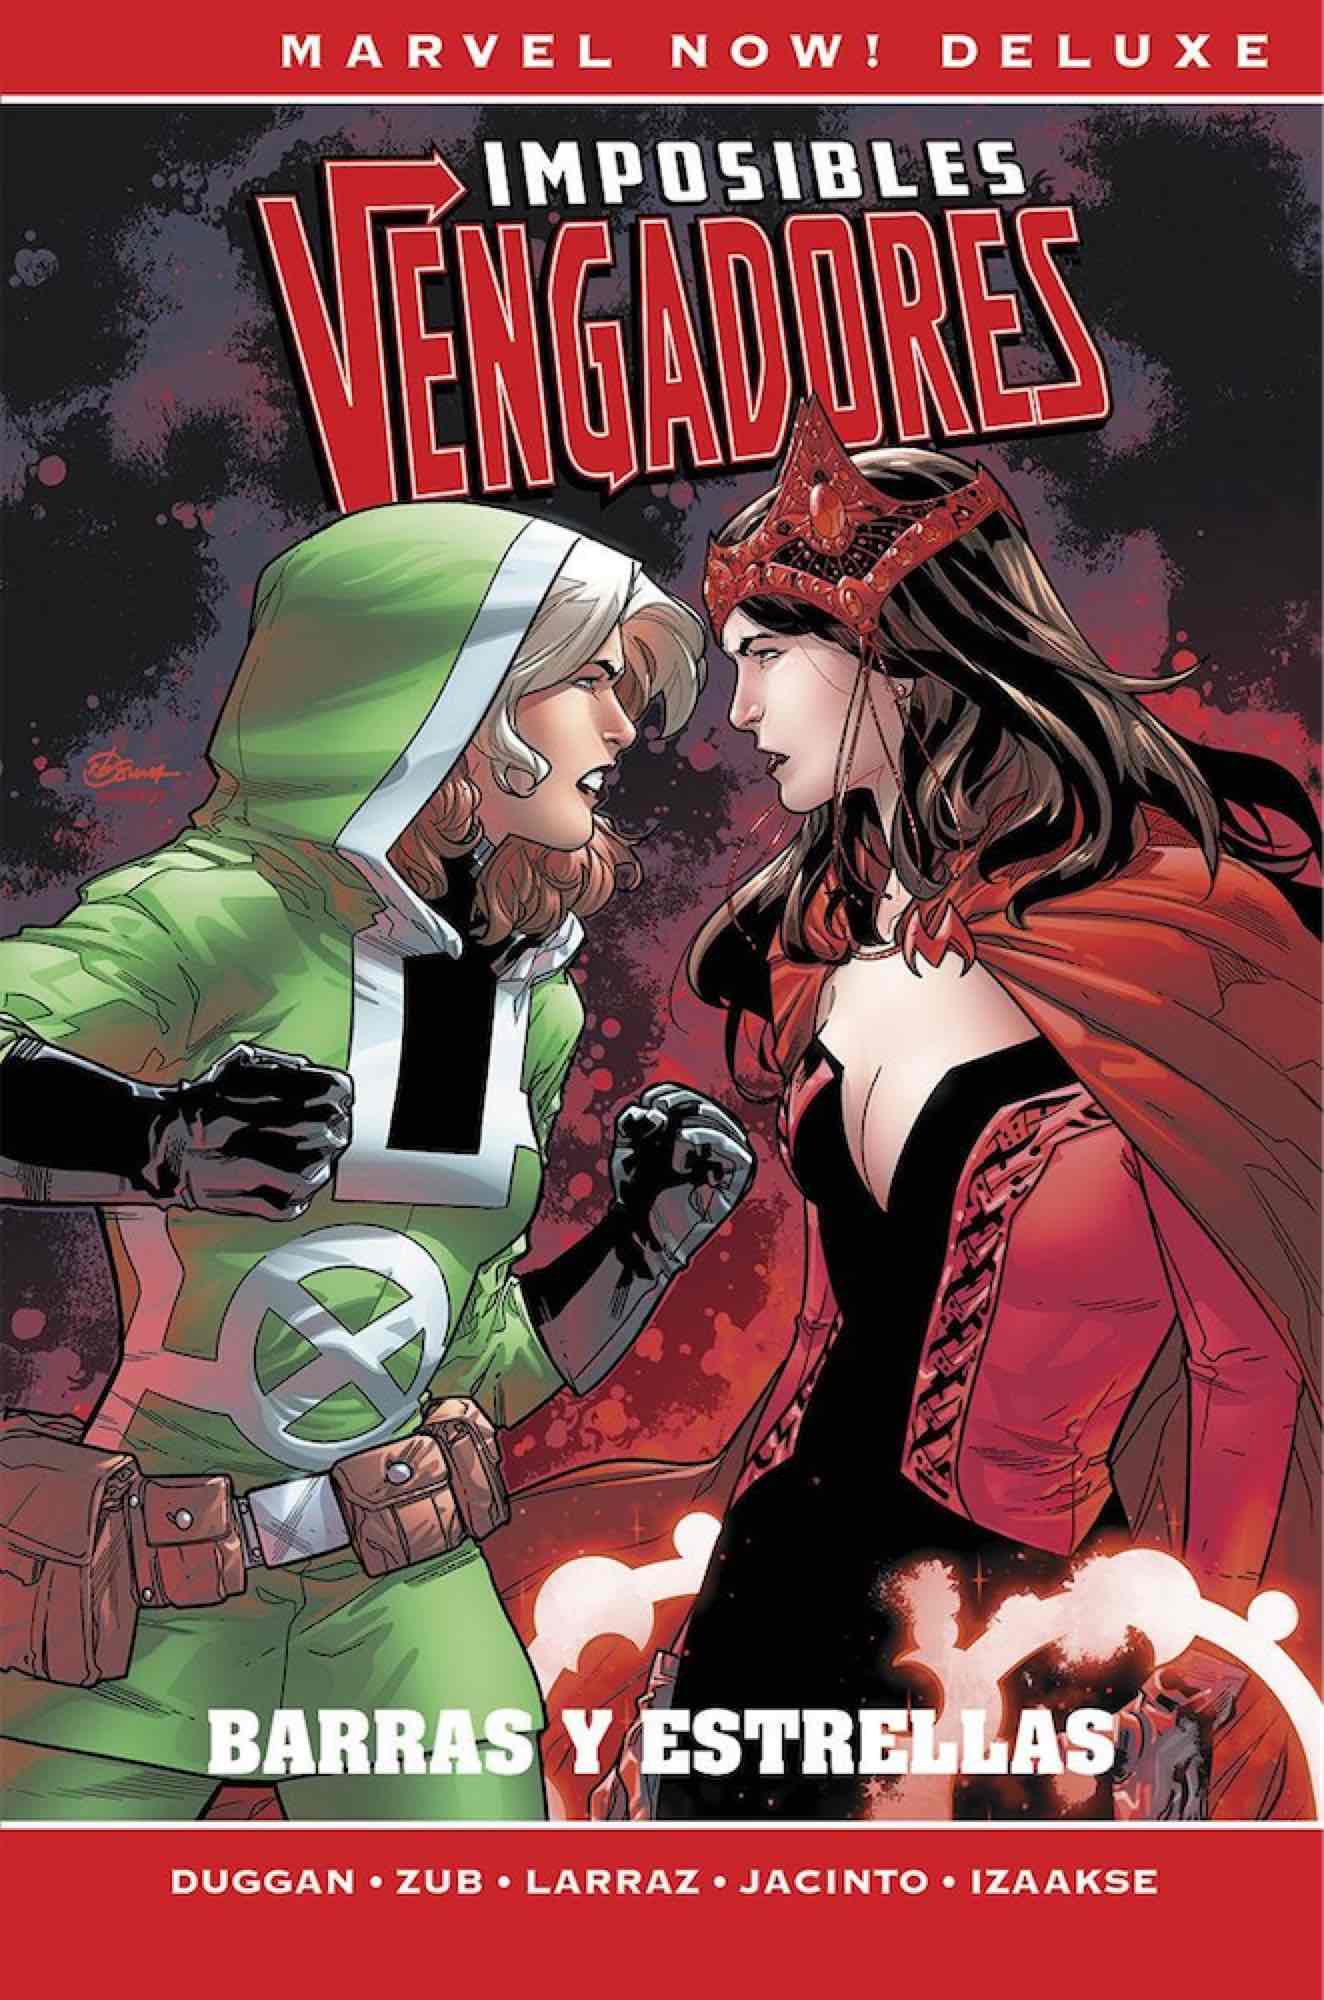 IMPOSIBLES VENGADORES 6 (MARVEL NOW! DELUXE)